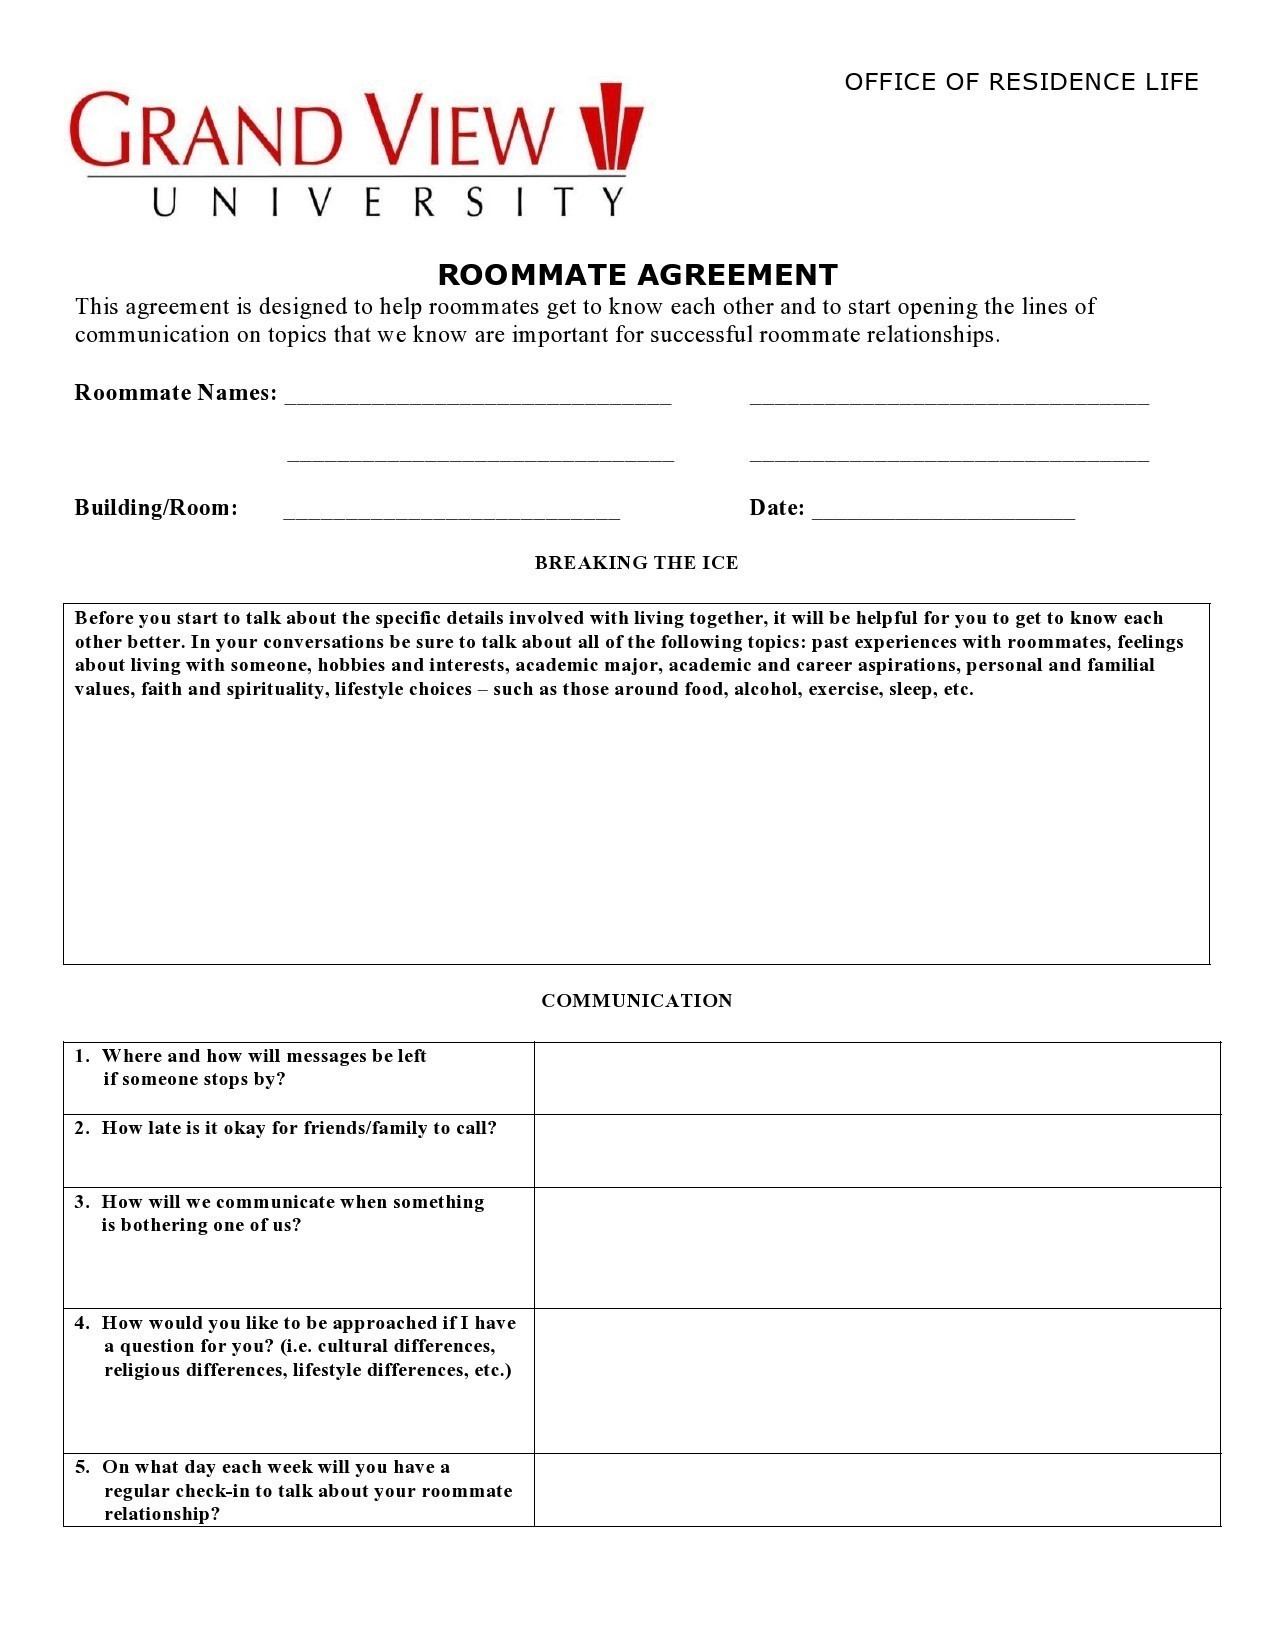 Free roommate agreement template 32